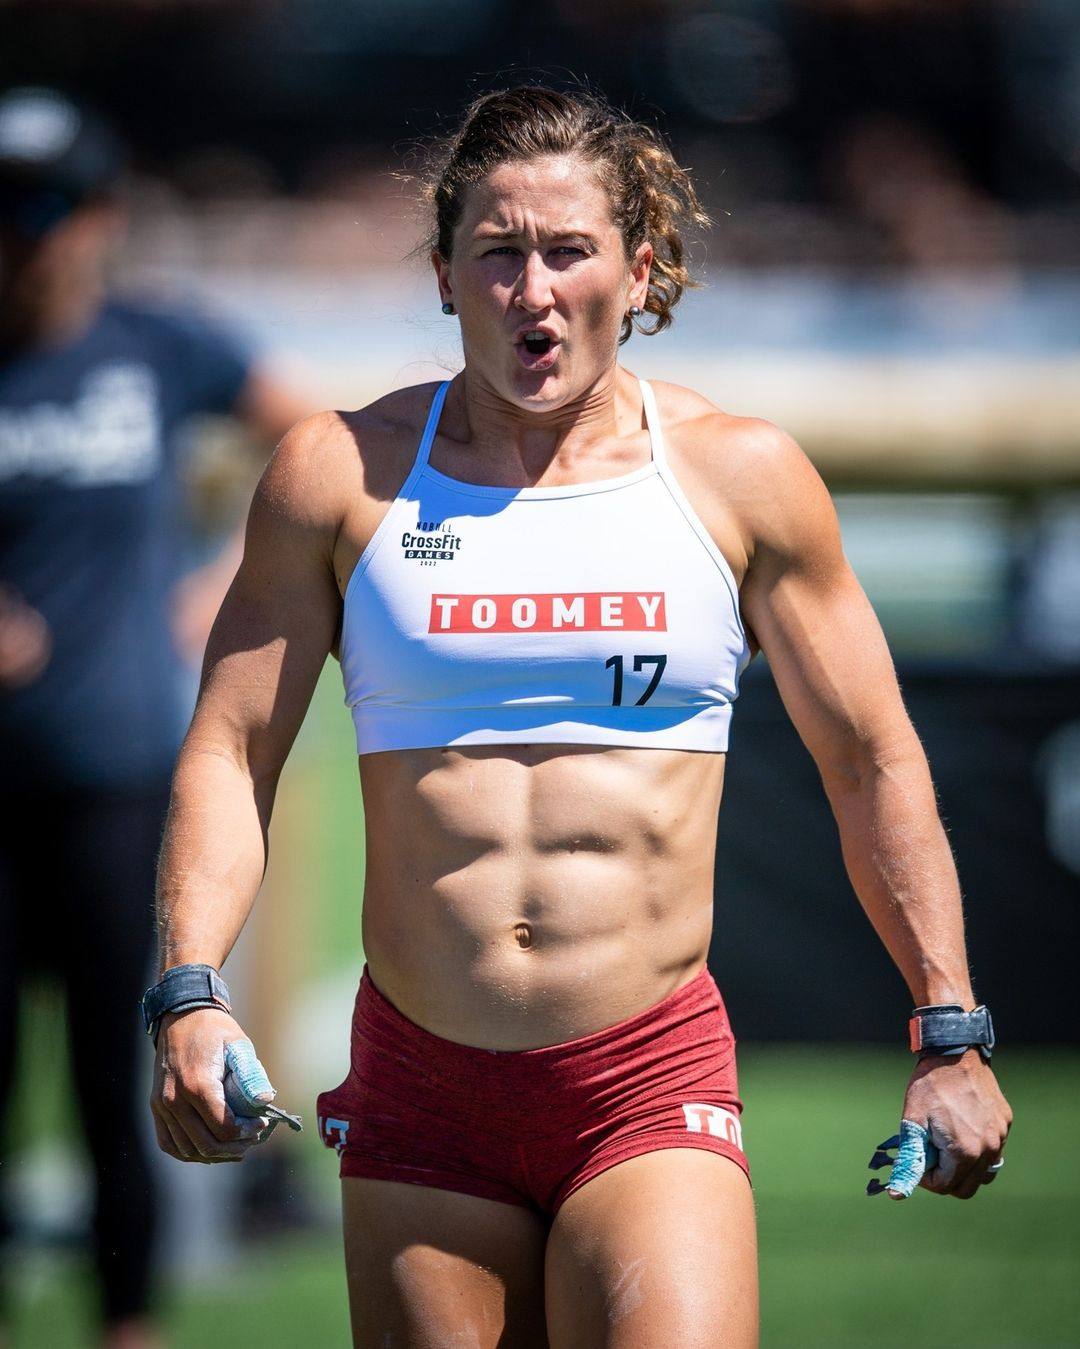 Tia-Clair Toomey competes in the ‘Up and Over’ event at the 2022 CrossFit Games. Photo: CrossFit